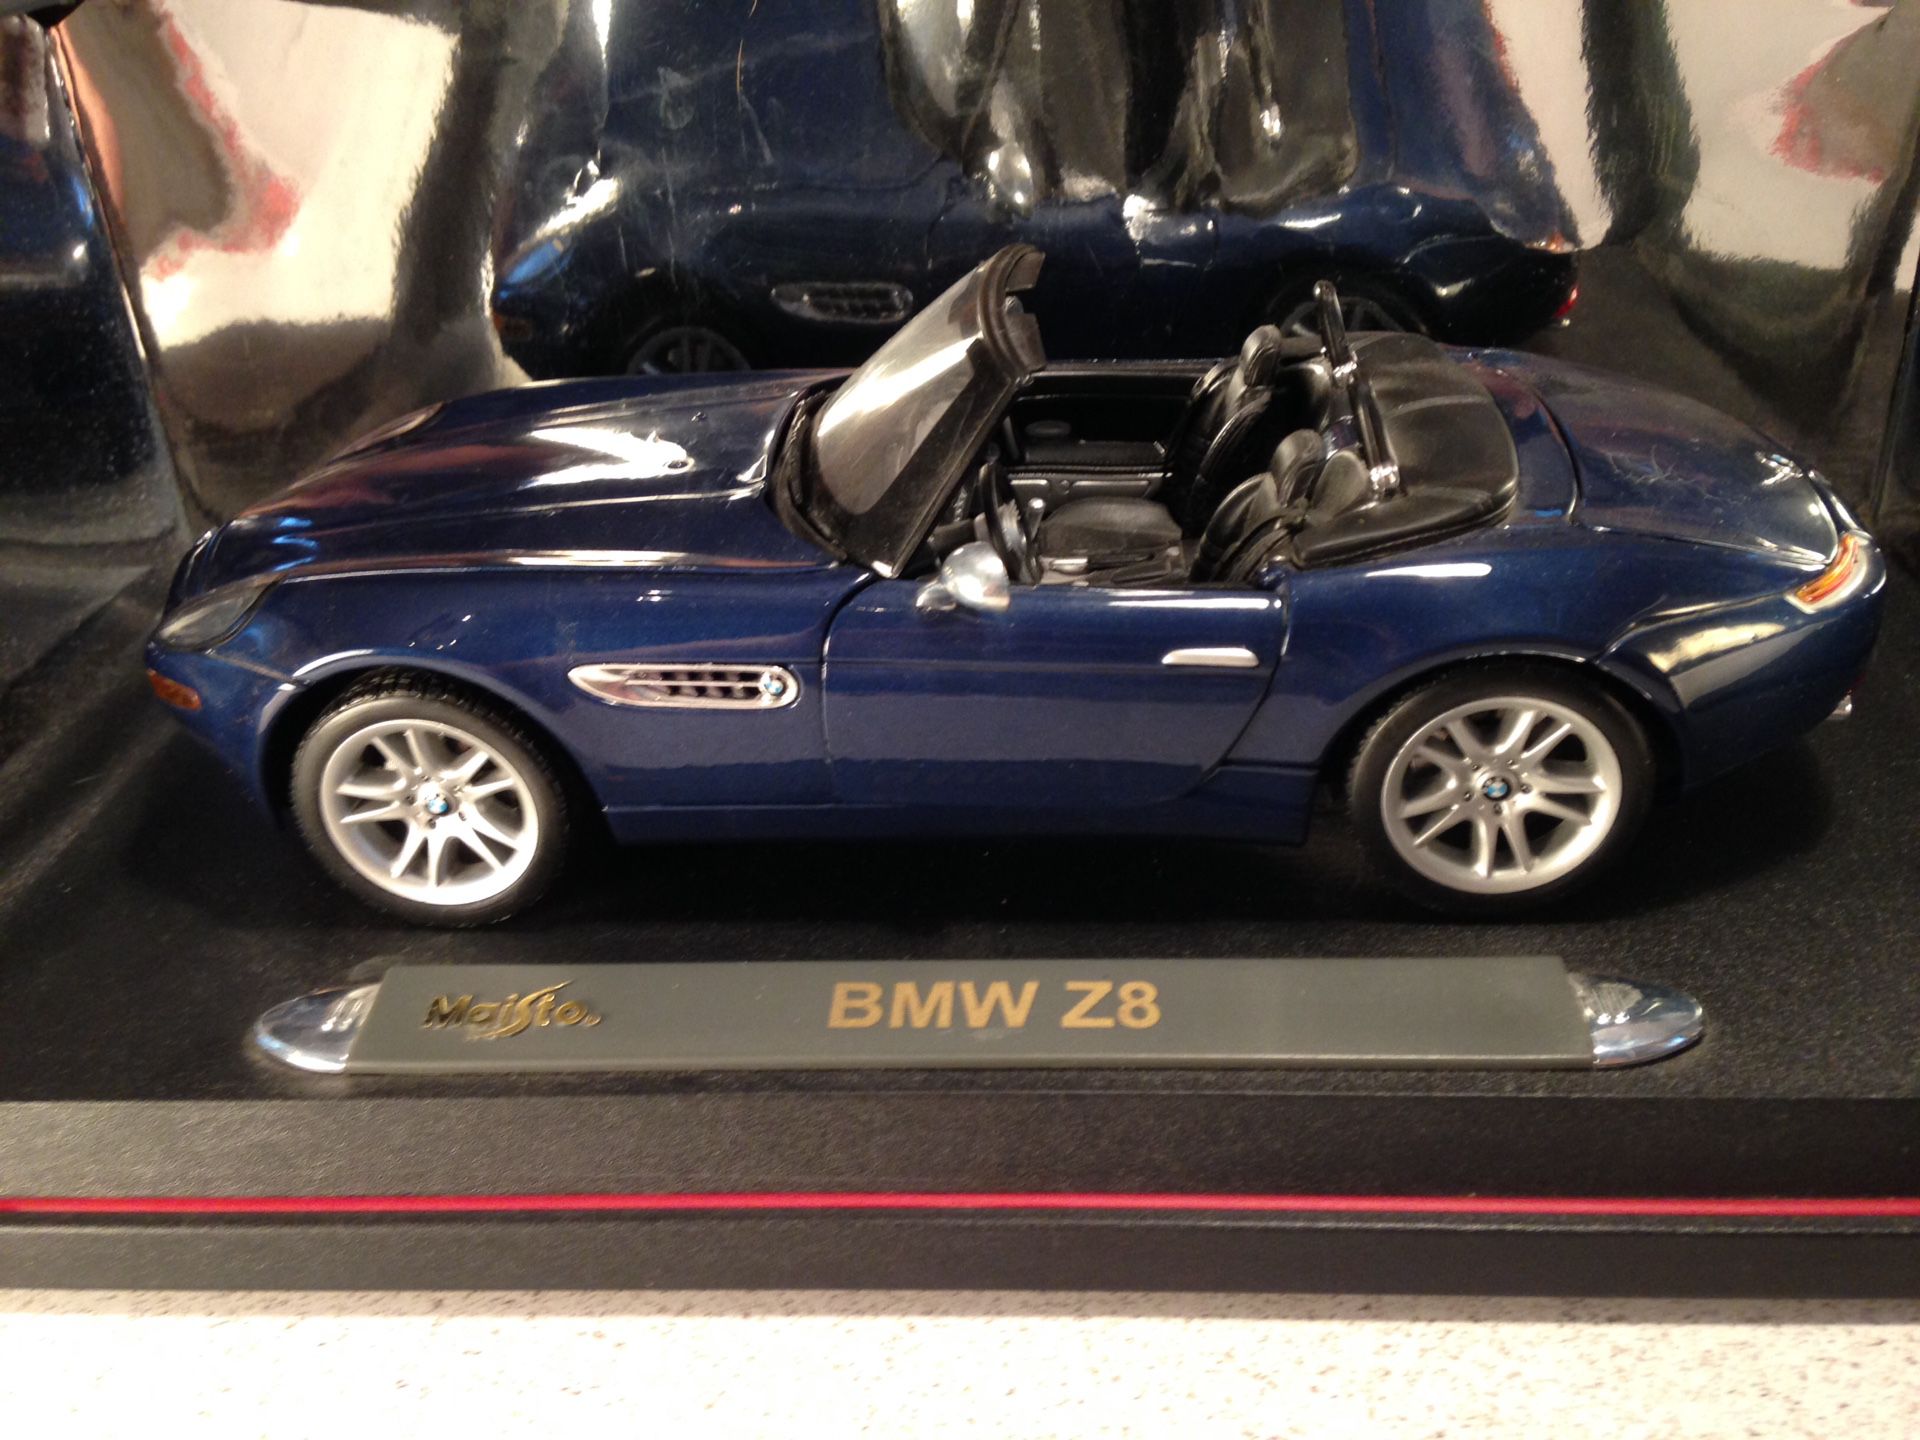 Maisto Bmw Z28 Model For Sale In Downers Grove Il Offerup